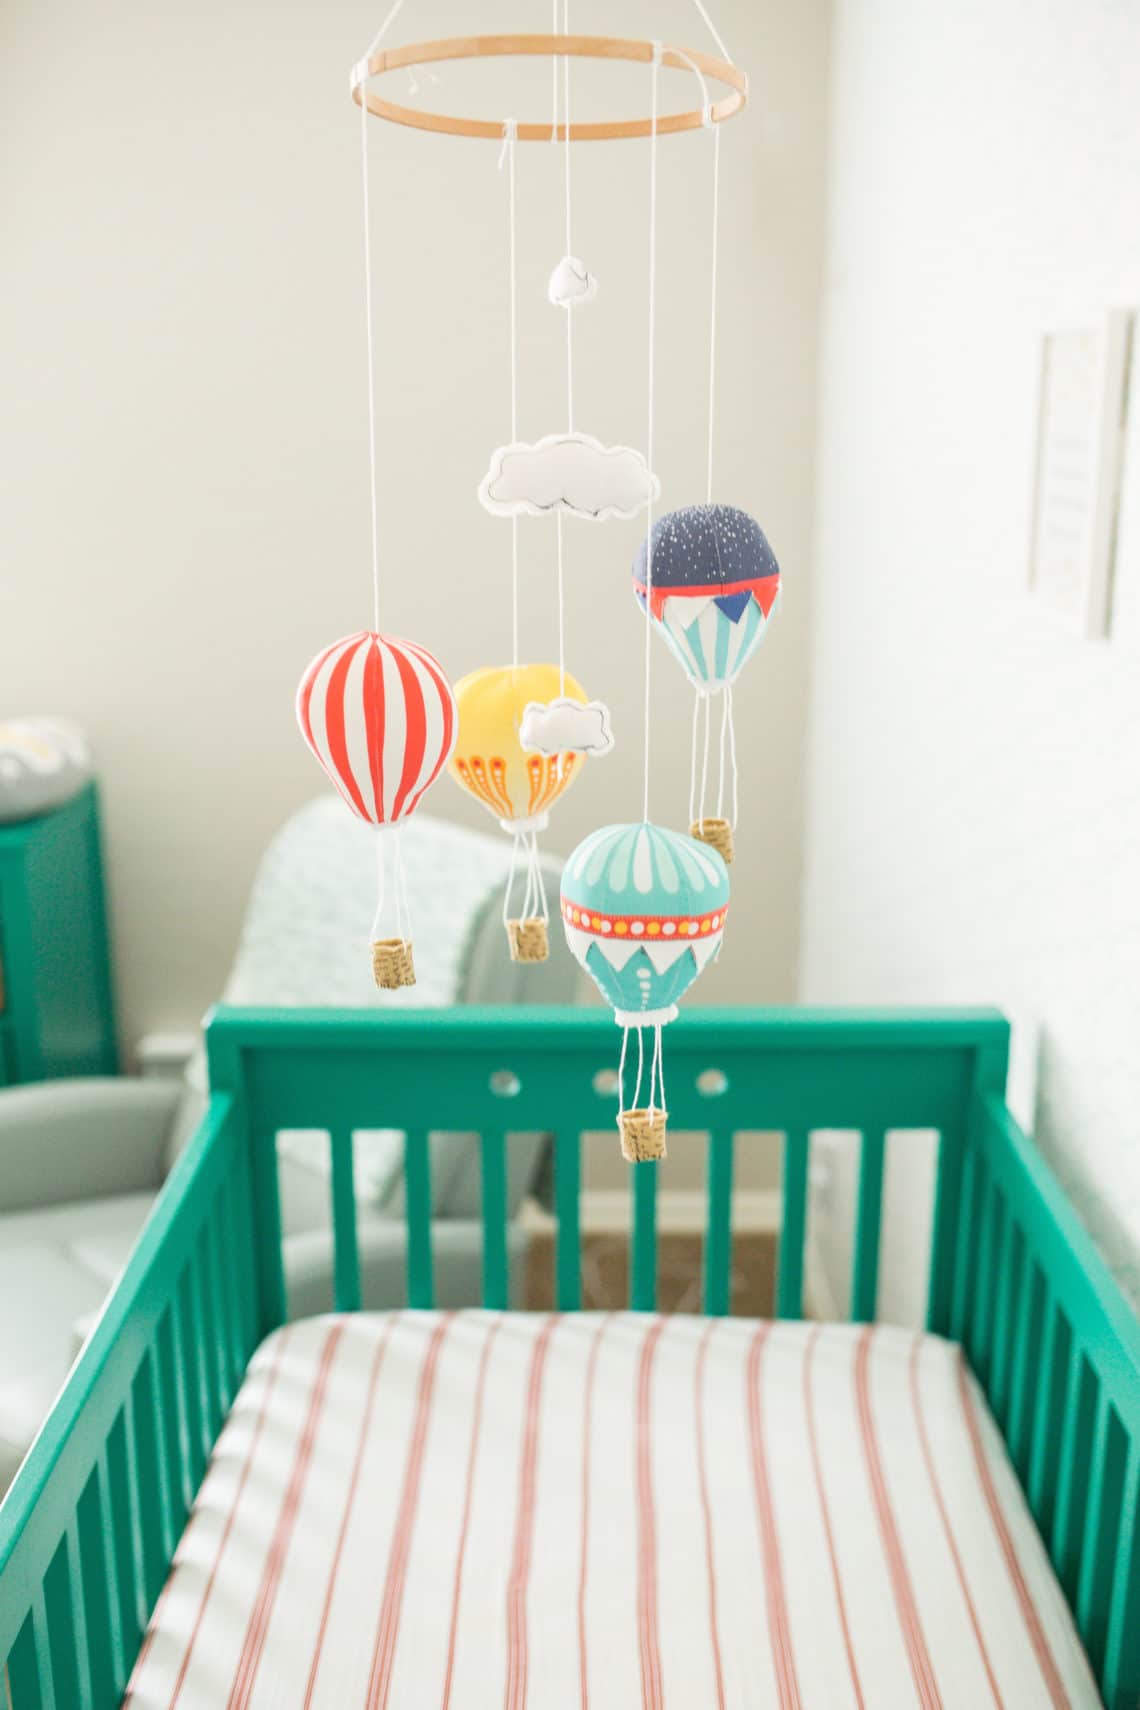 A modern nursery idea with a best-selling modern children's book theme. Here's the official nursery reveal to The Wonderful Things You Will Be Nursery with all the details!